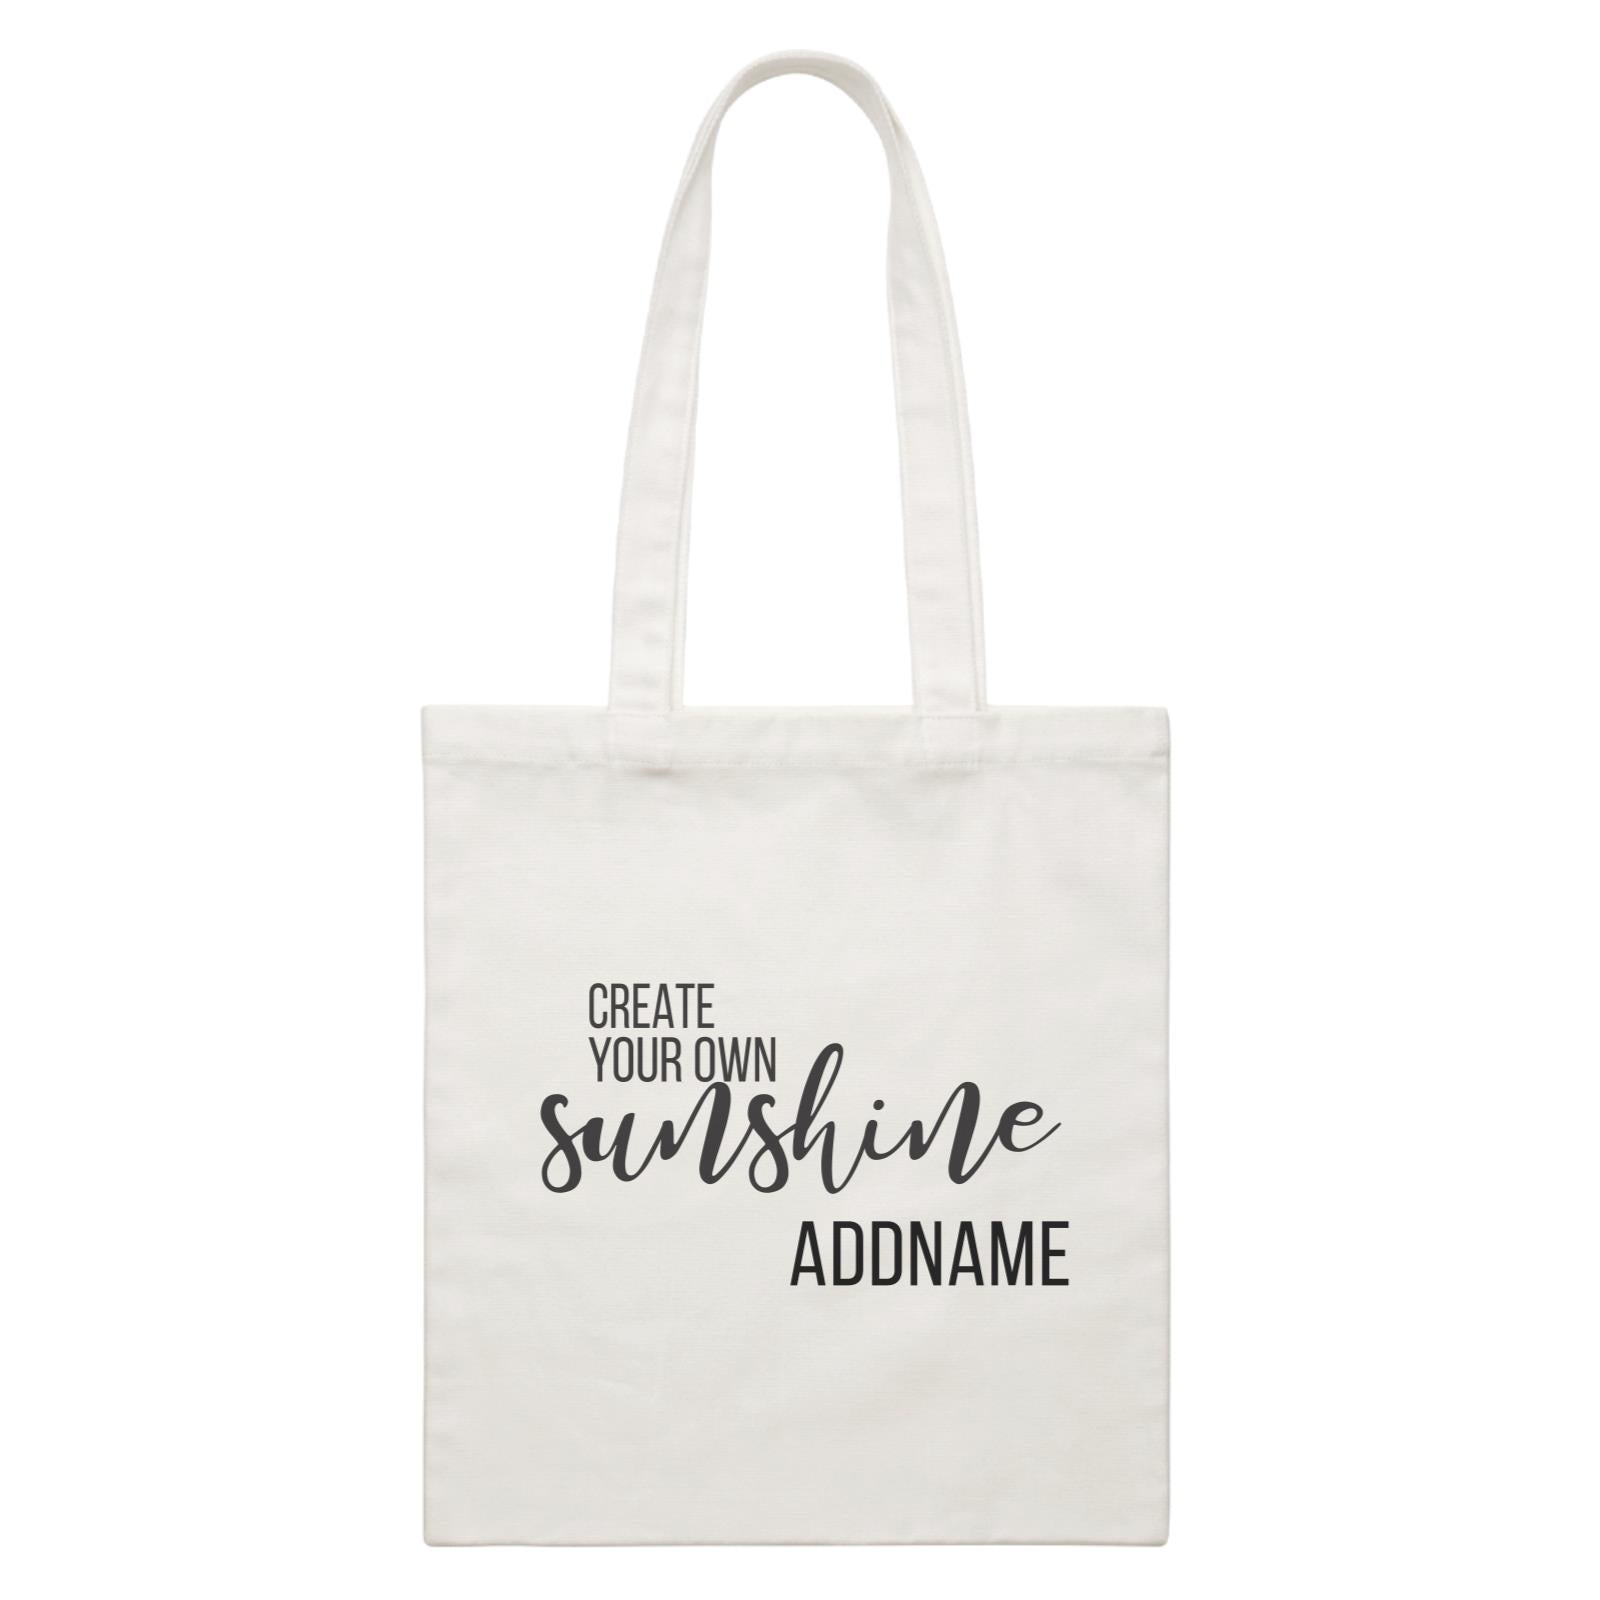 Inspiration Quotes Create Your Own Sunshine Addname White Canvas Bag